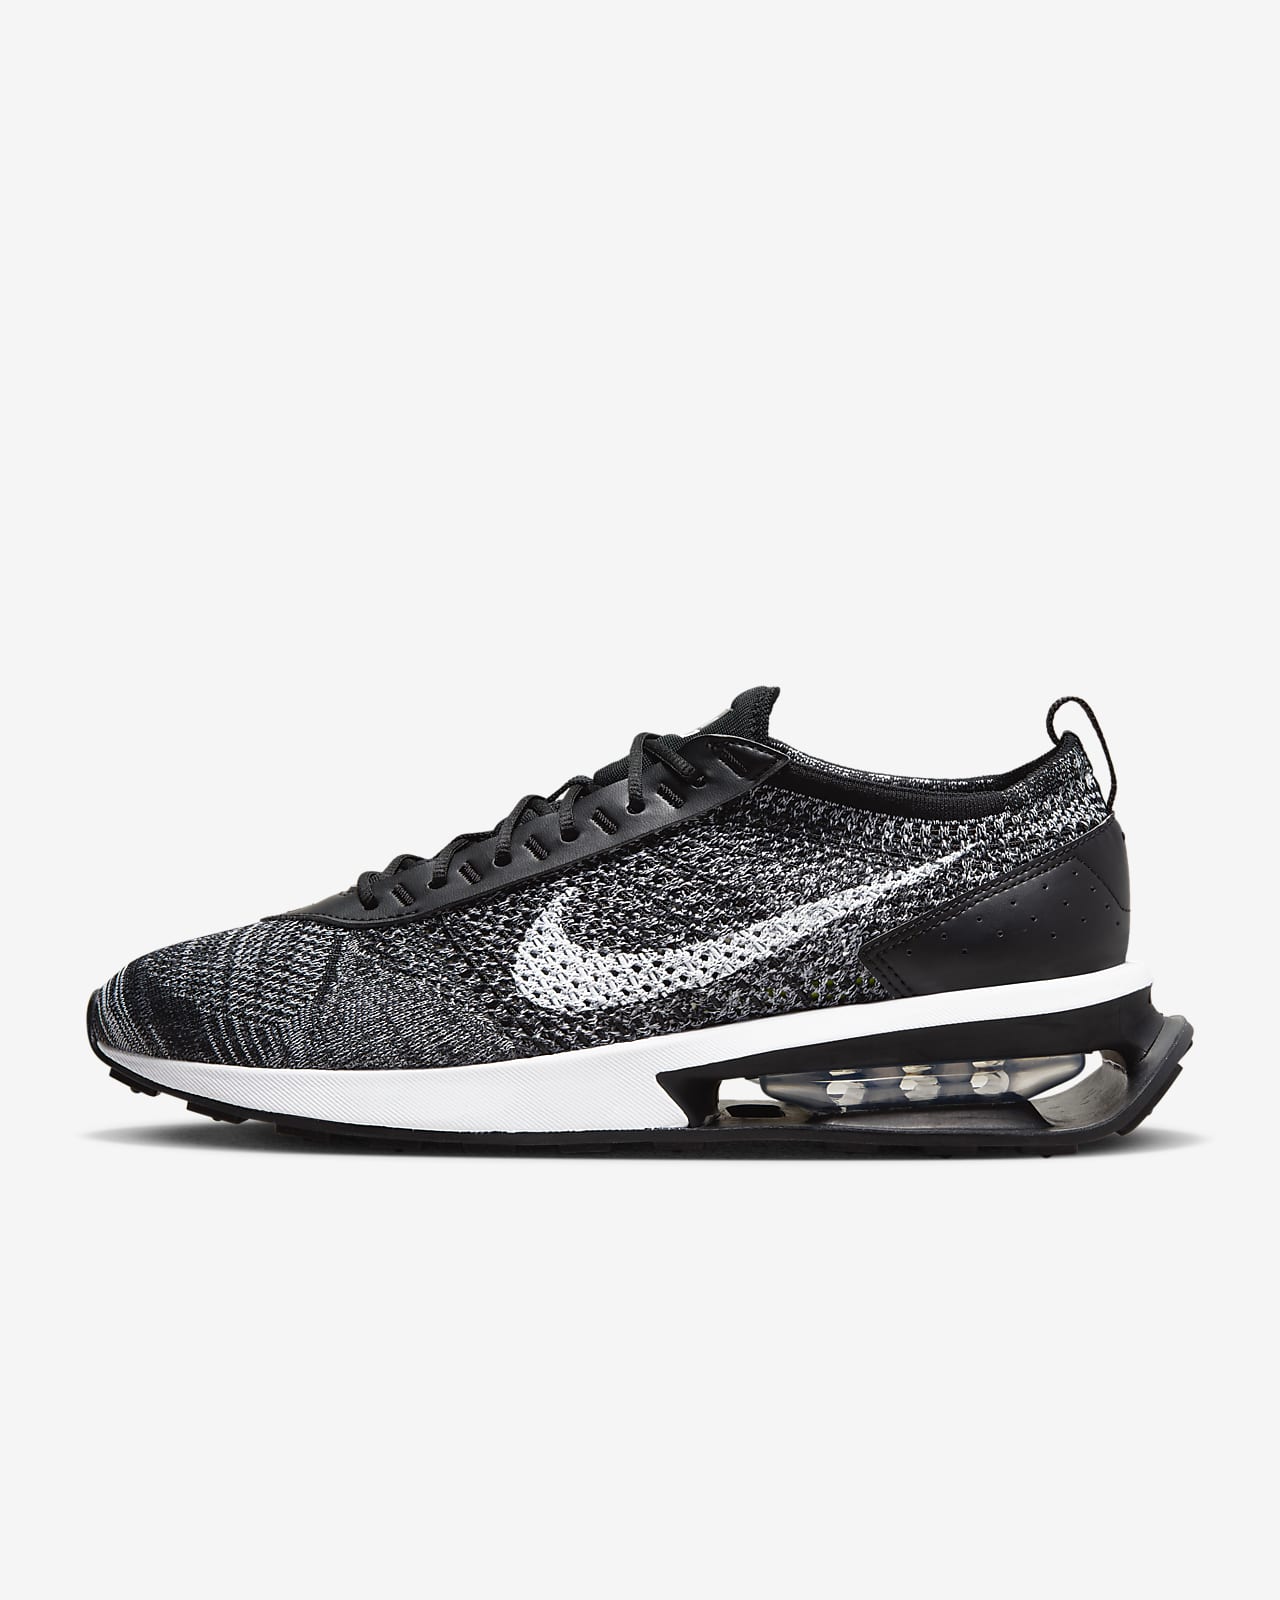 A faithful to understand Meaningless Nike Air Max Flyknit Racer Men's Shoes. Nike ID